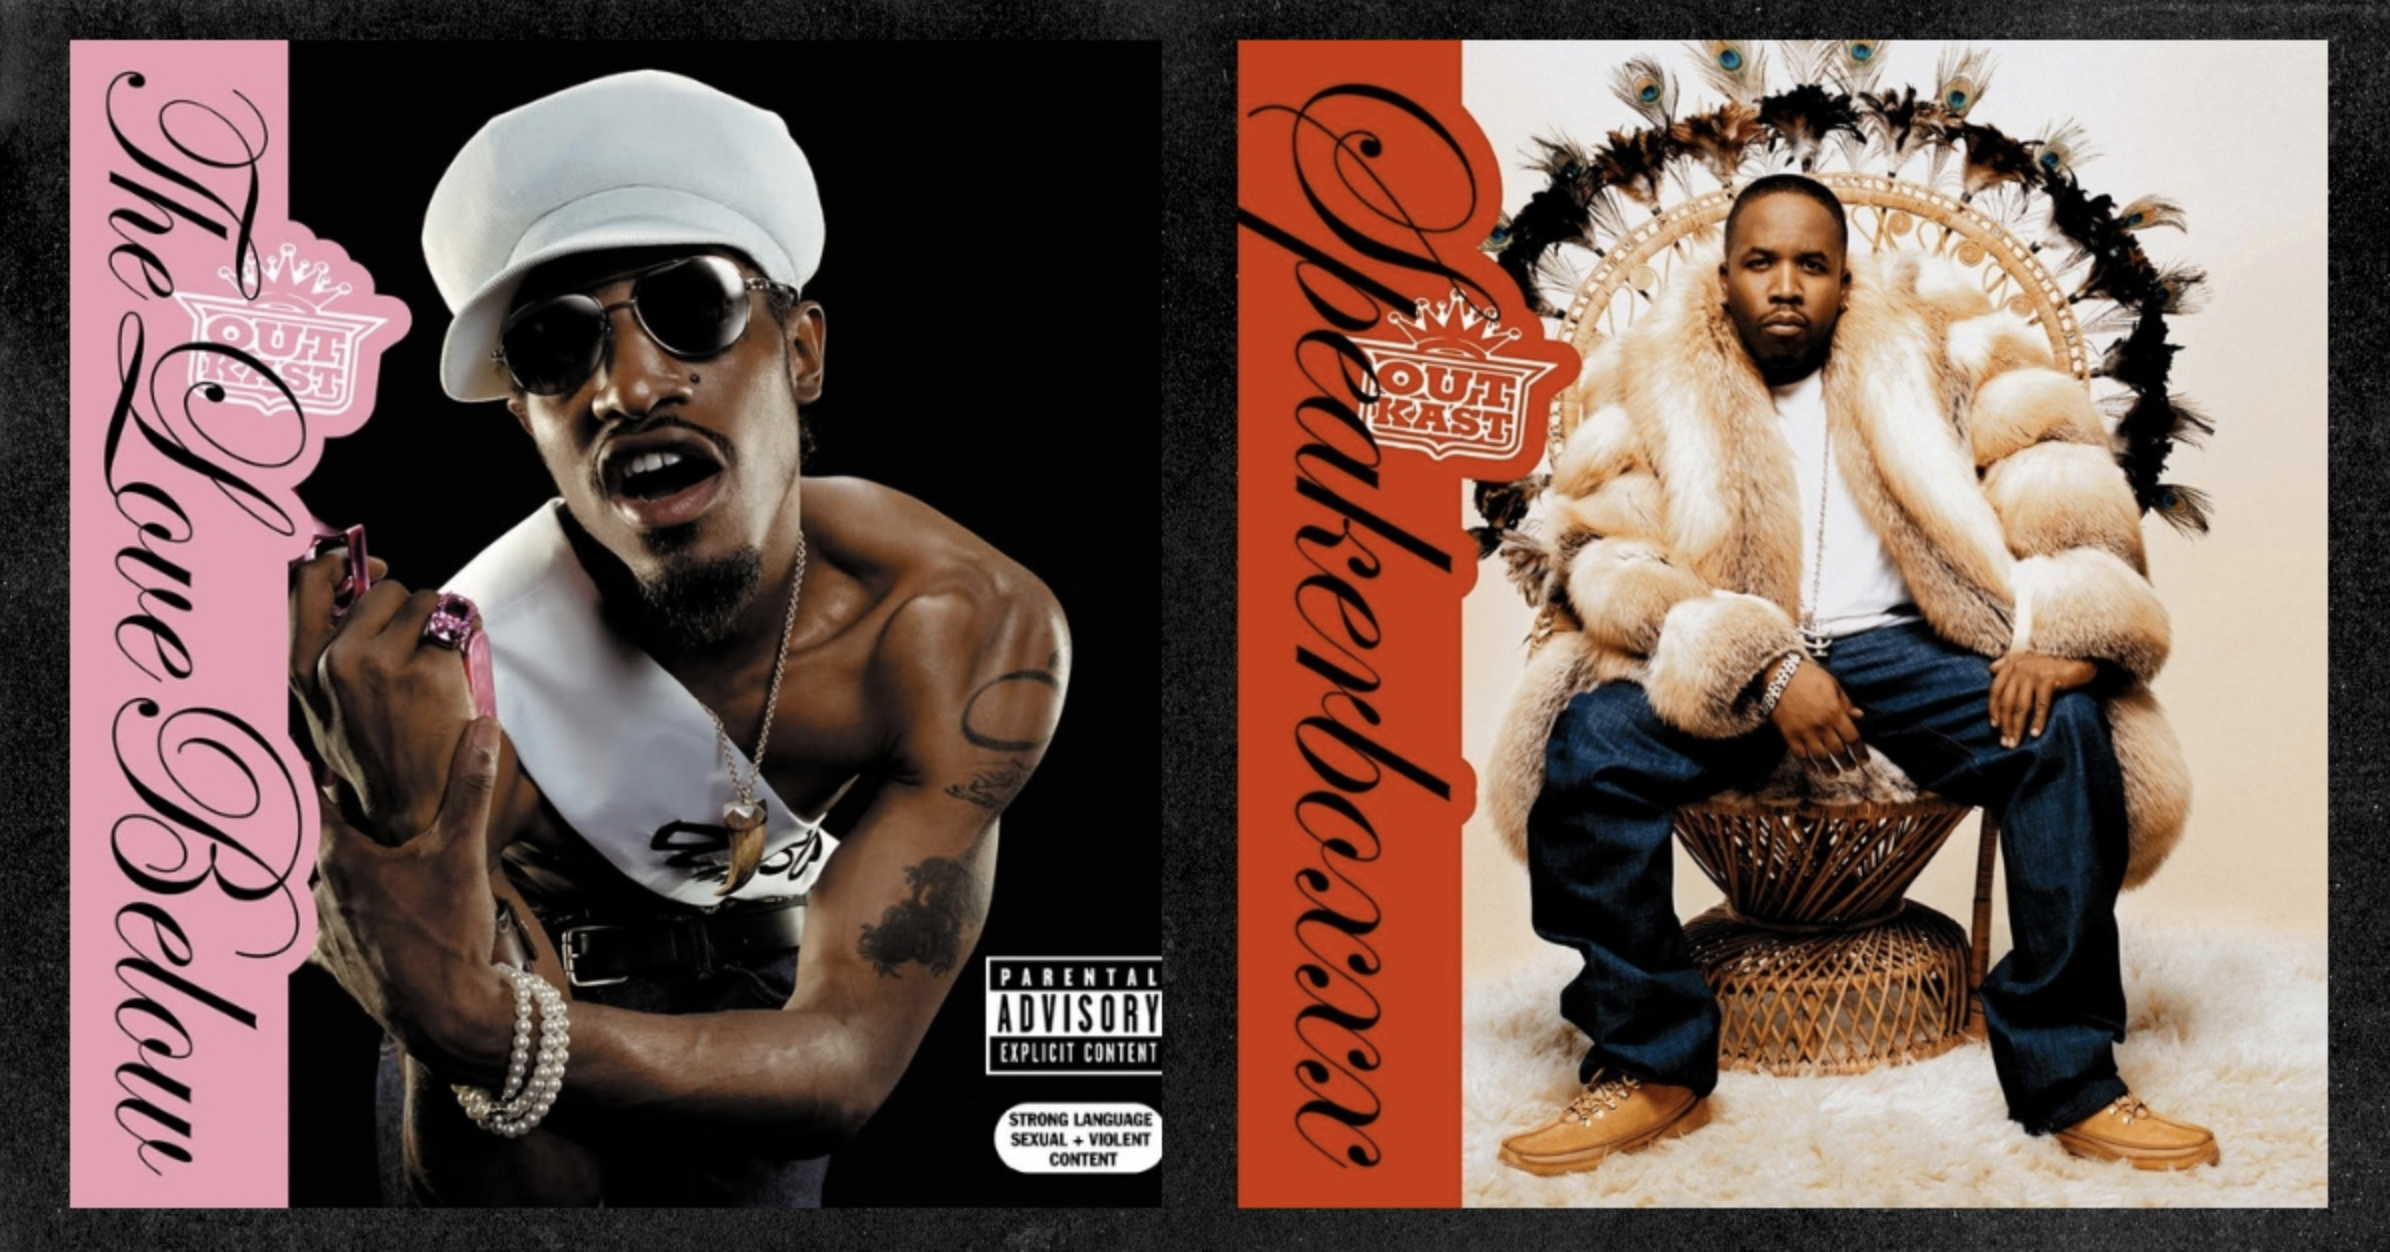 Big whole. Outkast Stankonia. MS Jackson Outkast обложка. Outkast album Cover. Speakerboxxx/the Love below Outkast.